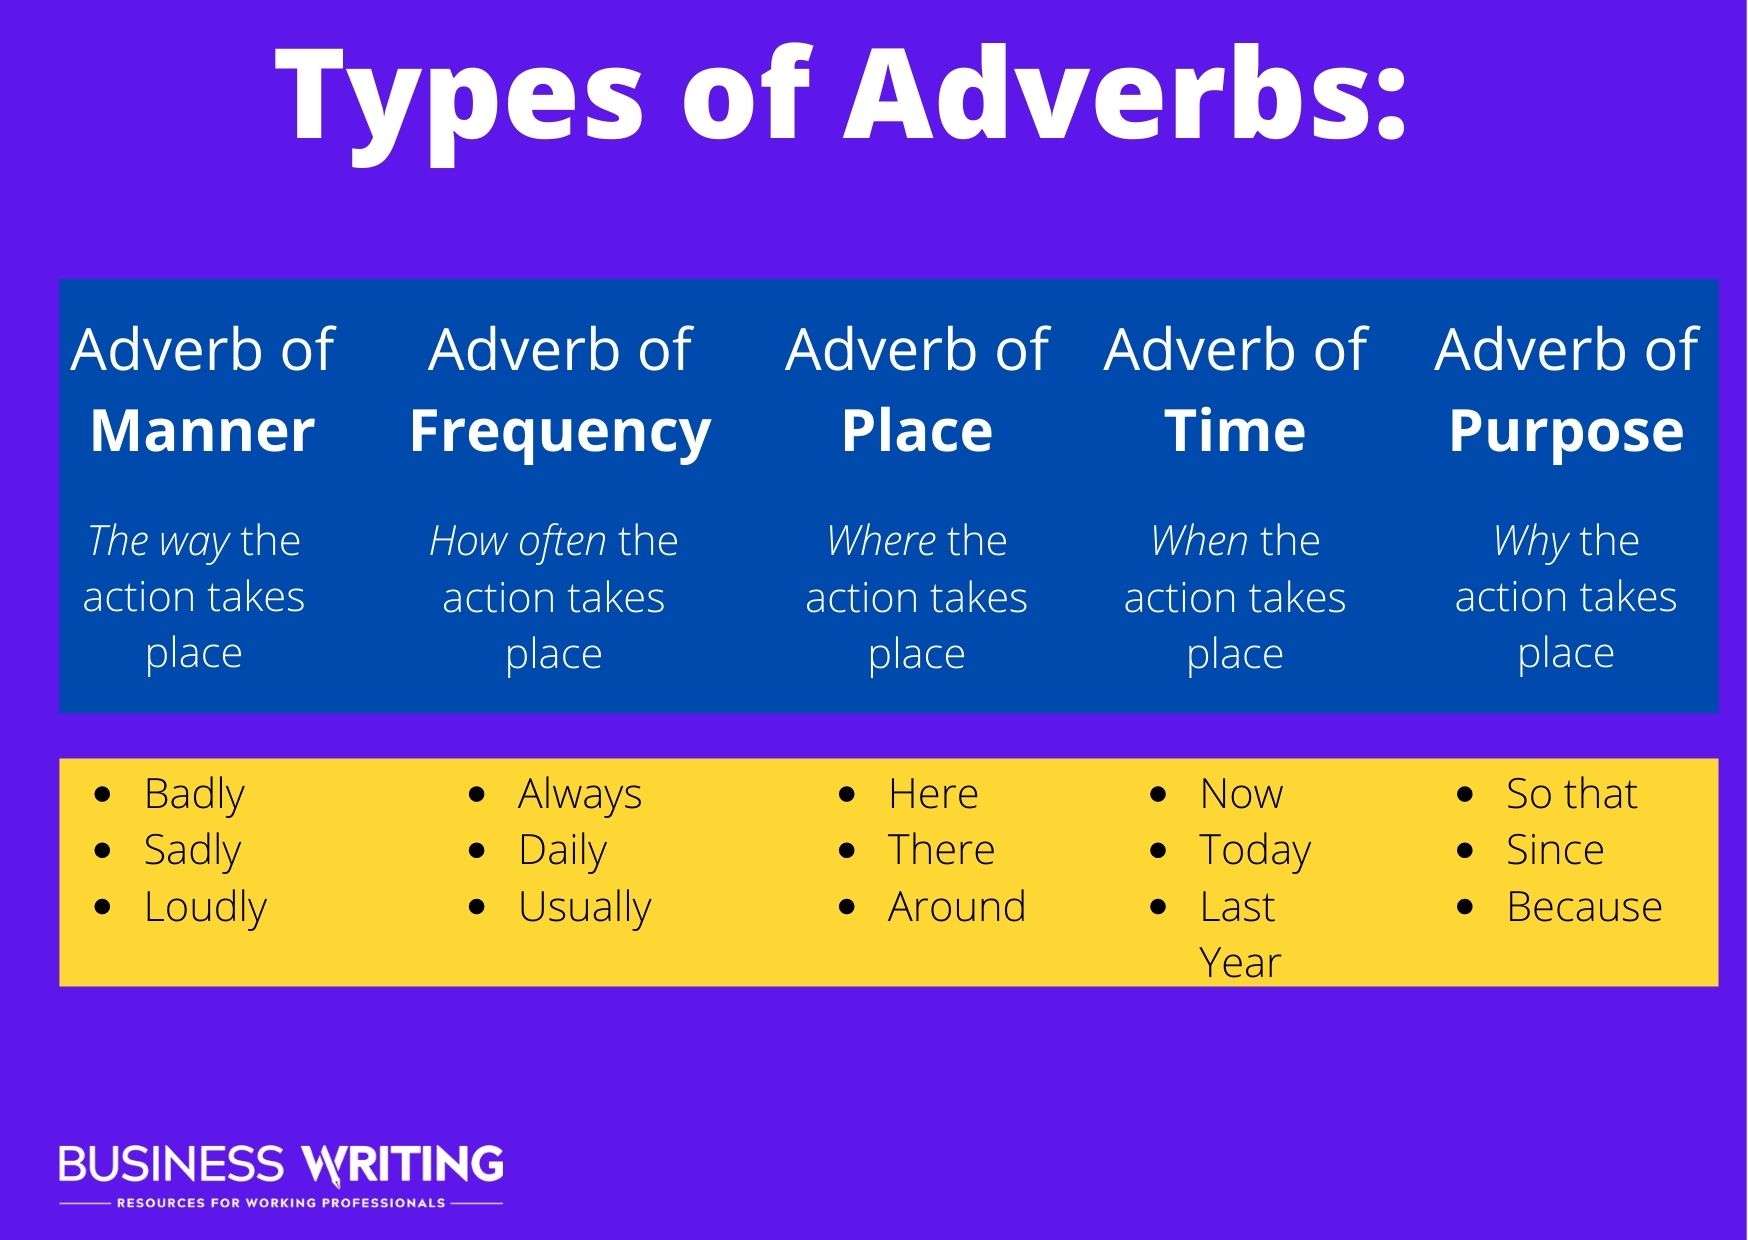 Graphic showing types of adverbs: Adverb of Manner, Adverb of Place, Adverb of Time, Adverb of Frequency, Adverb of Purpose